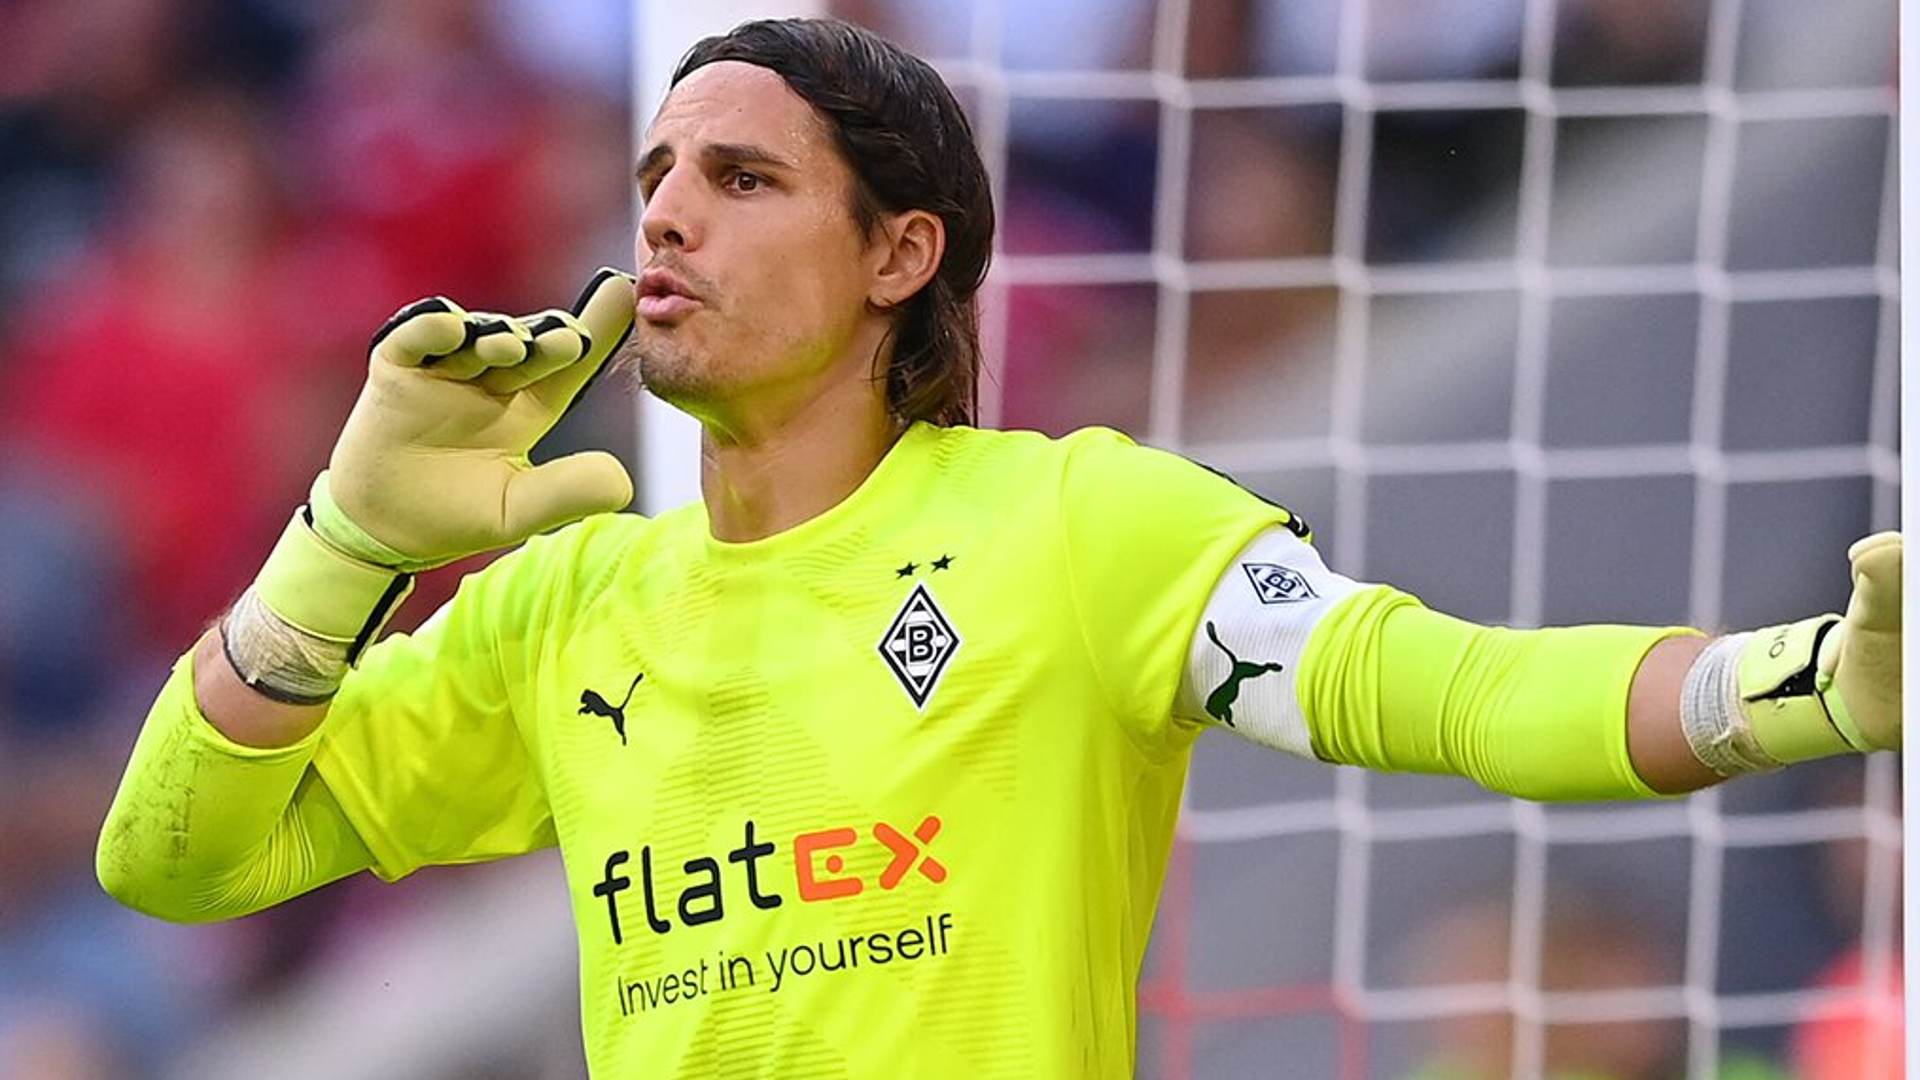 What is Yann Sommer’s net worth, salary, transfer value and endorsements?